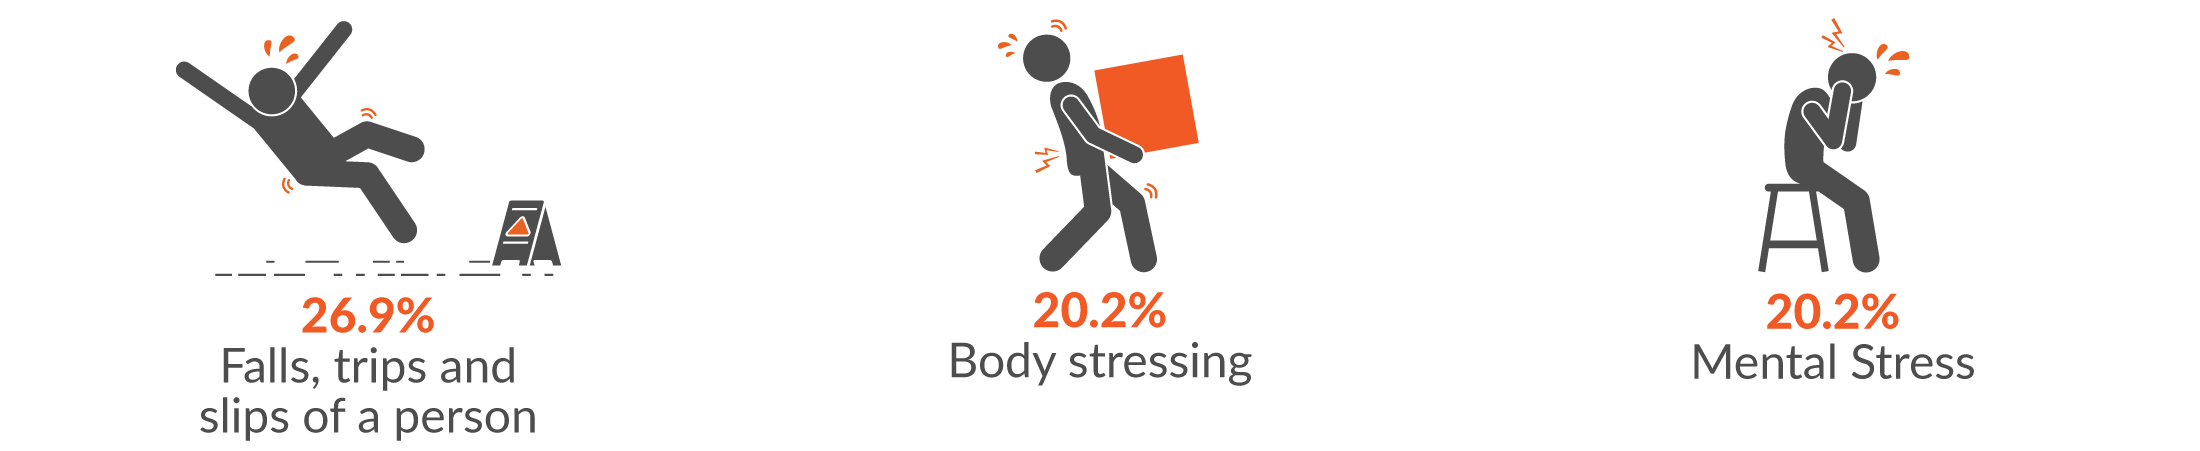 This infographic shows the main three mechanisms of serious injury for Government administration & defence claims were 26.9% falls, trips and slips of a person; 20.2% body stressing; and 20.2% mental stress.